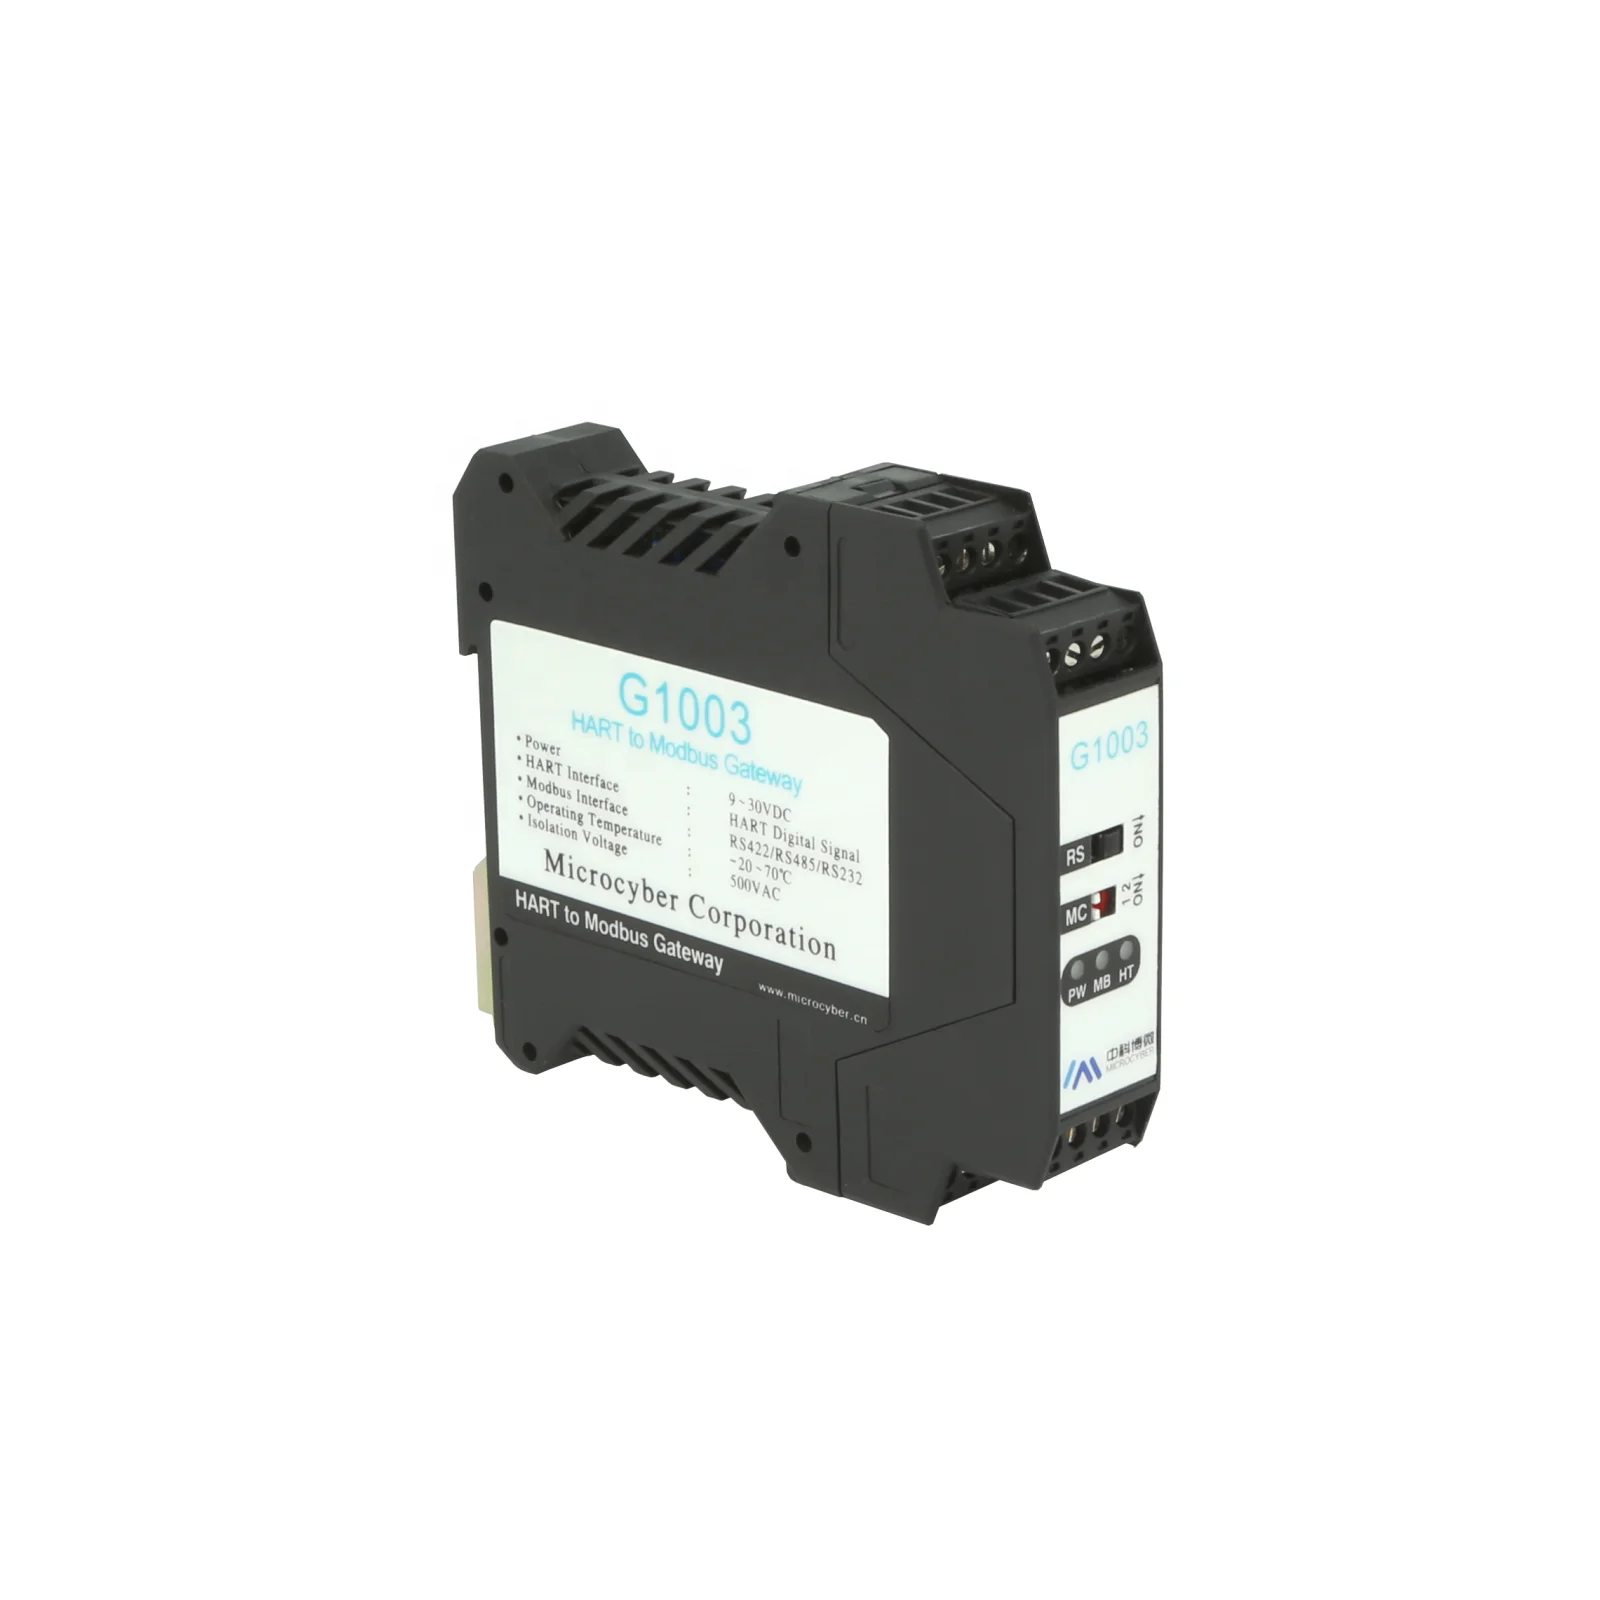 

HART to RS485 RS232 converter HART Standard slave connected to Modbus master